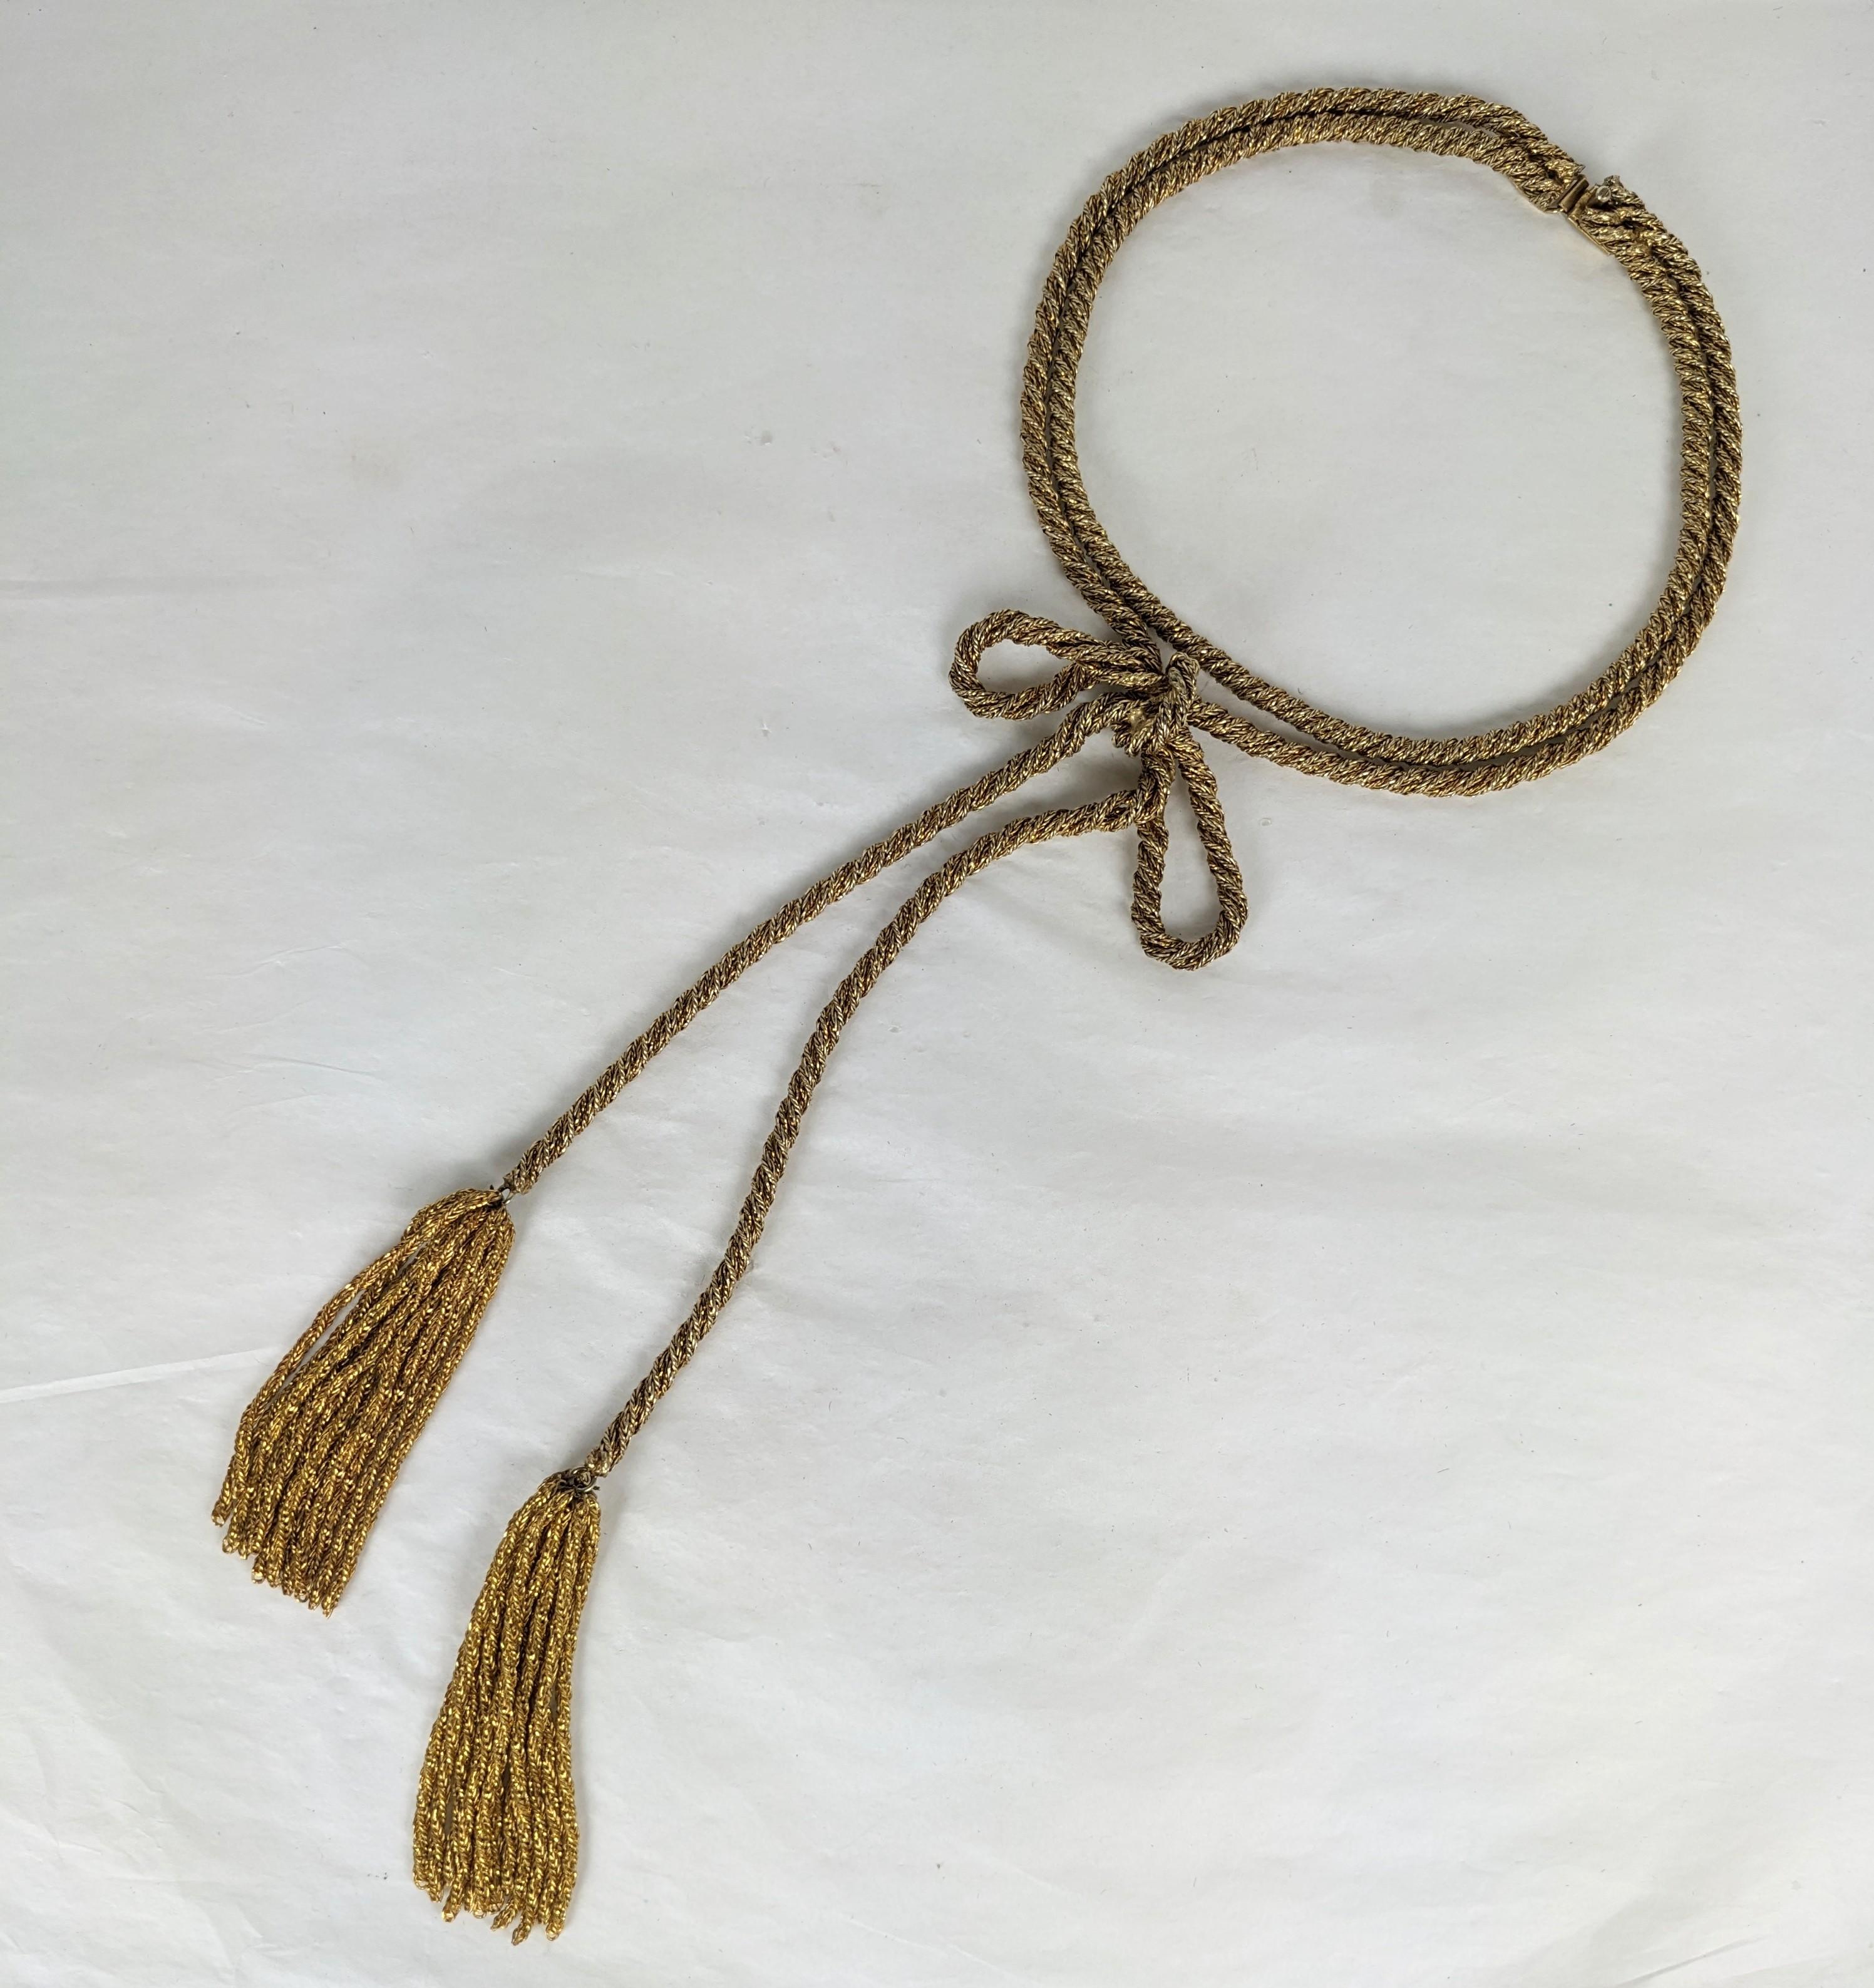 Unusual French Gilt Rope Bow Necklace from the 1950's. Super intricate construction with 2 necklaces attached to one clasp. One is high on neck and the other has a bow with self chain tassels. Each necklace is made of 2 strands of twisted chain to